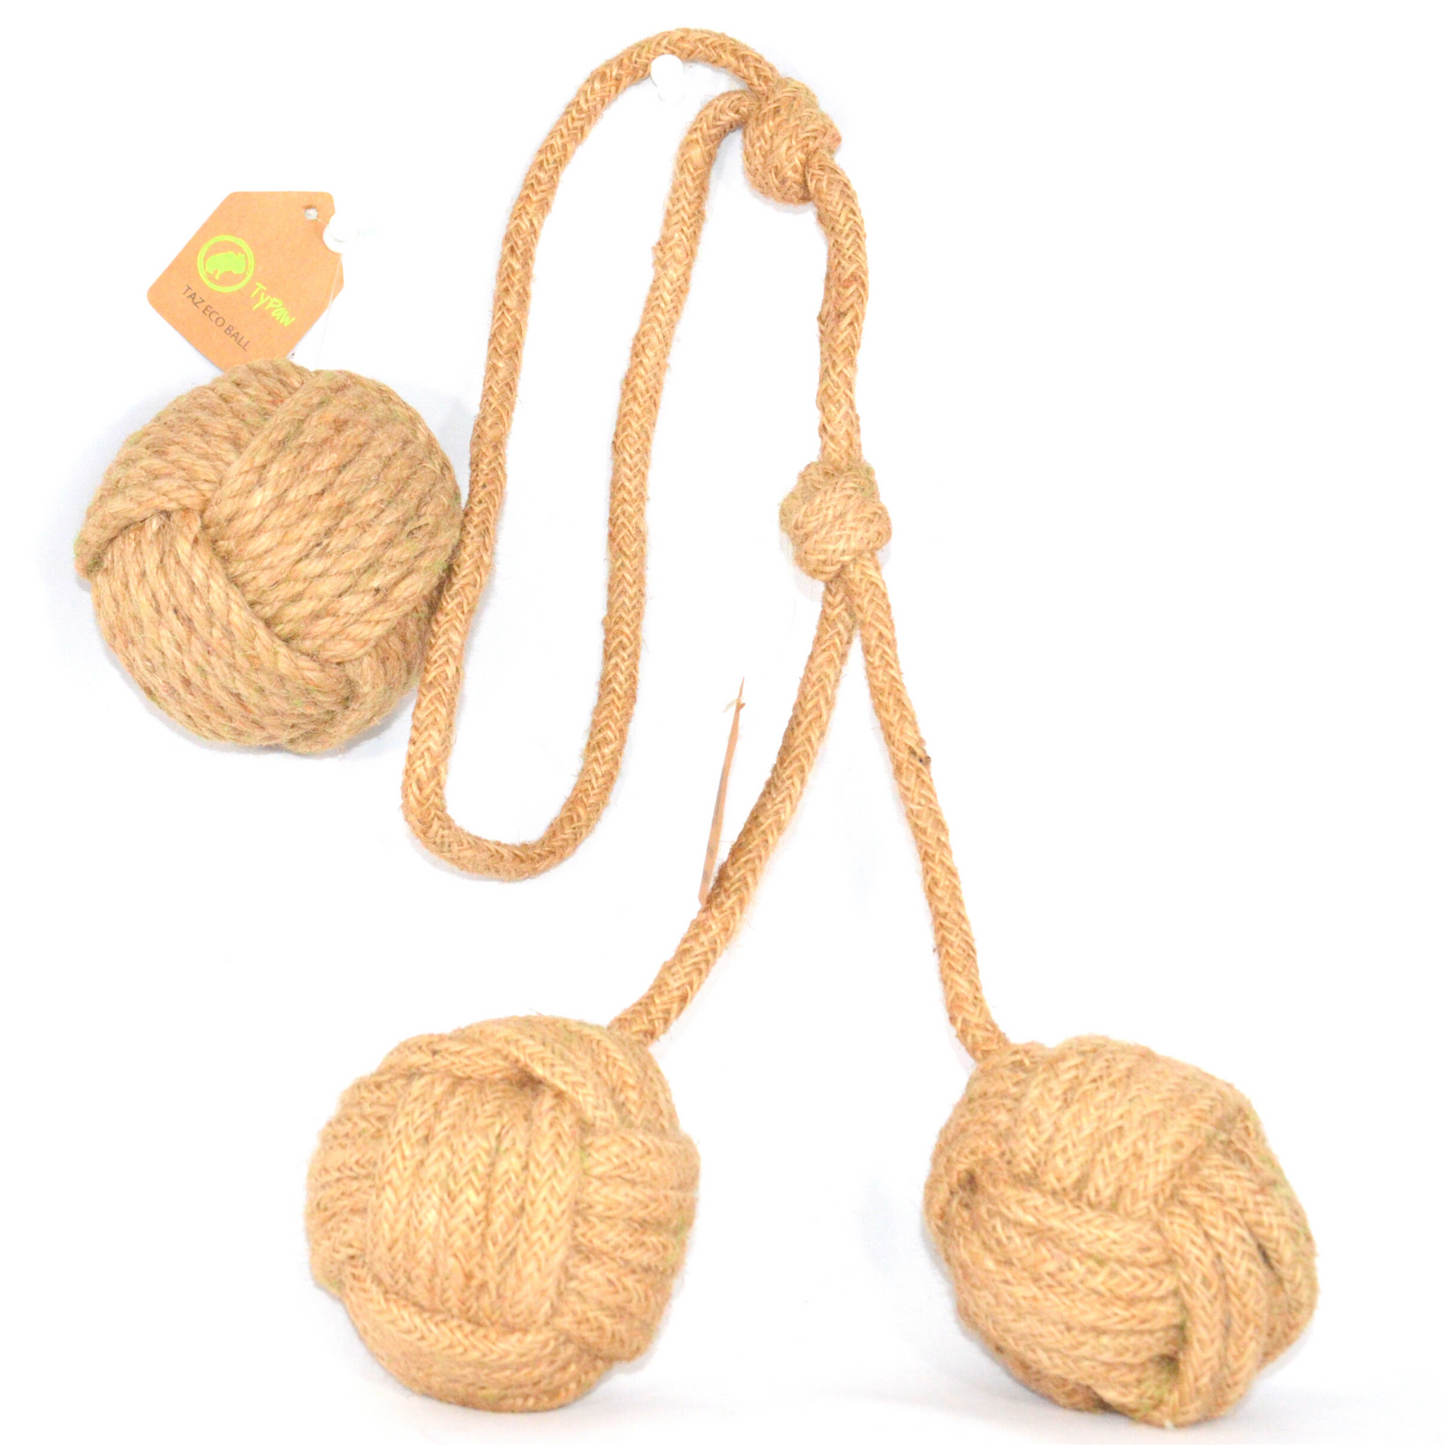 Organic Jute Rope Toys - 2 in a box